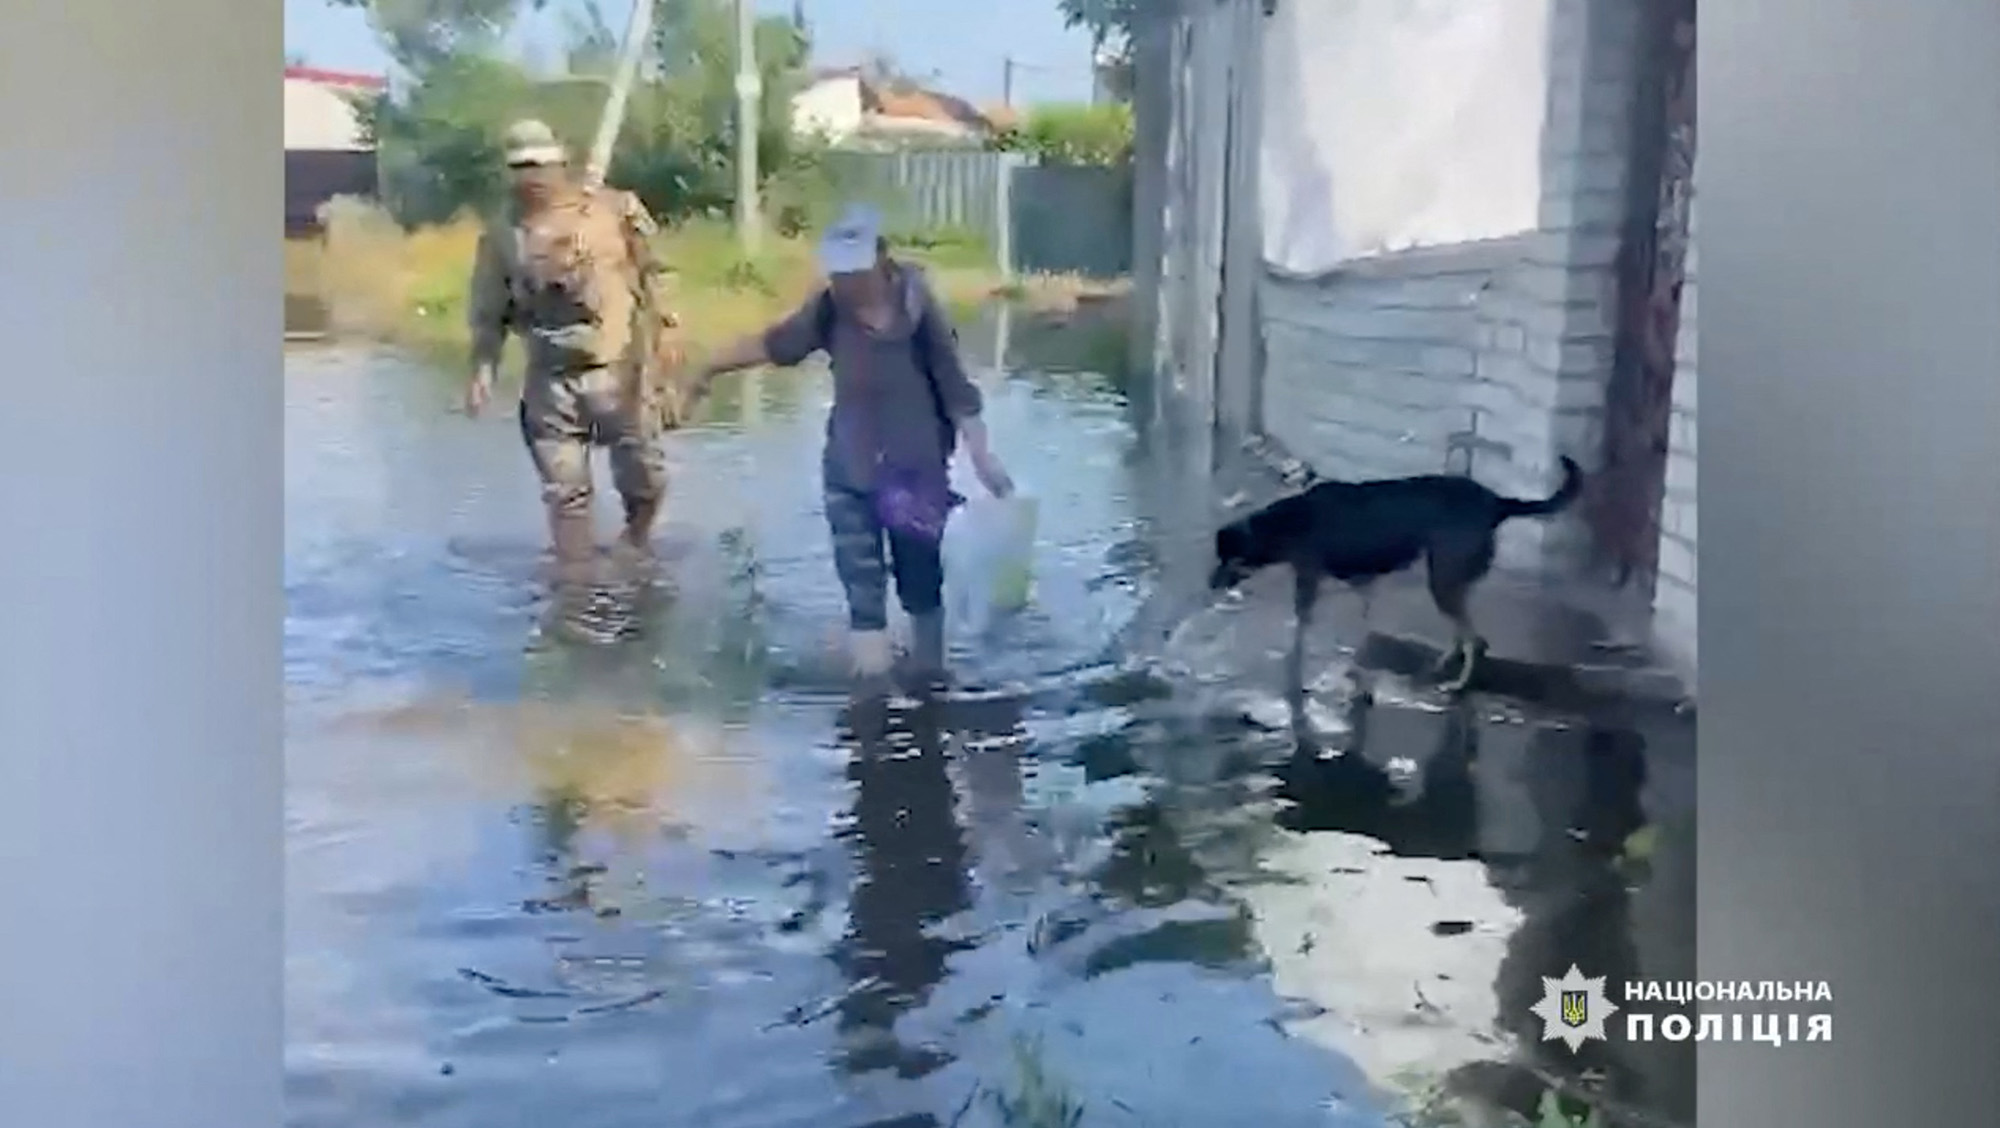 A person wades through floodwaters as police officers conduct patrols and help citizens evacuate to safe places following floods in Kherson region, Ukraine, on June 6.